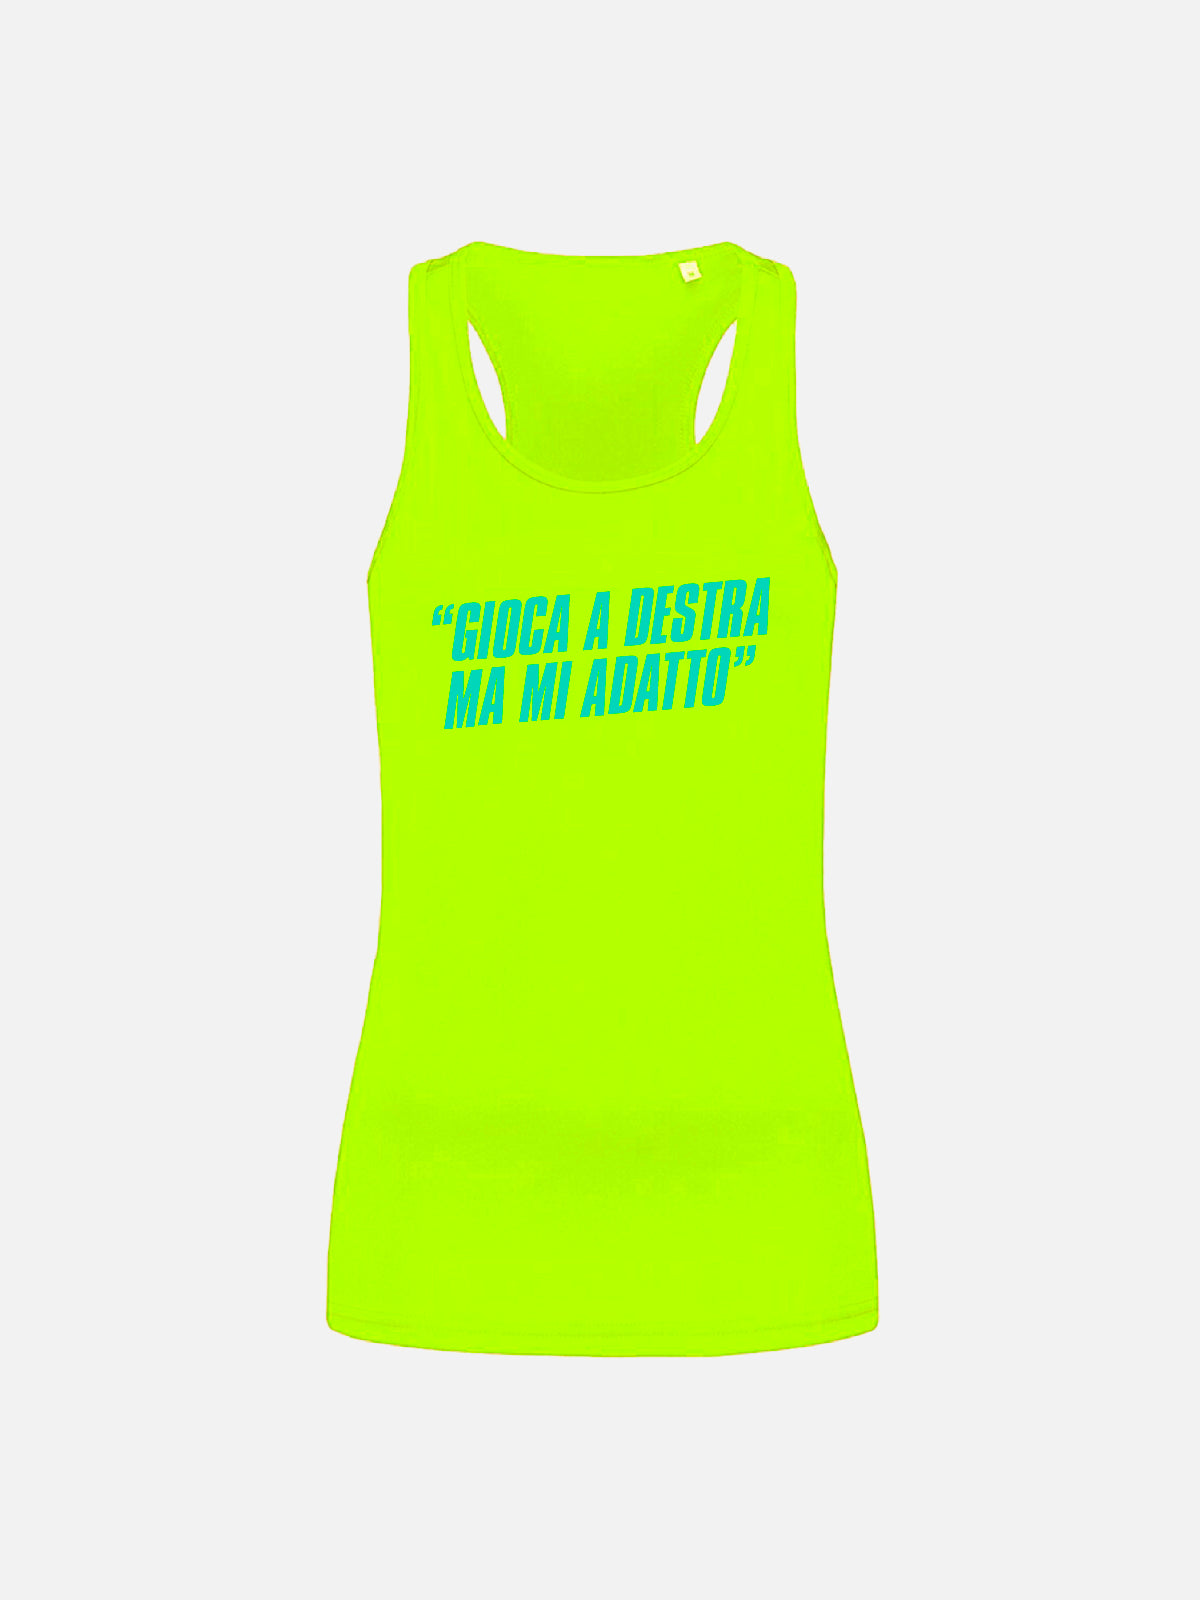 Tank top - “I play on the right but I adapt"